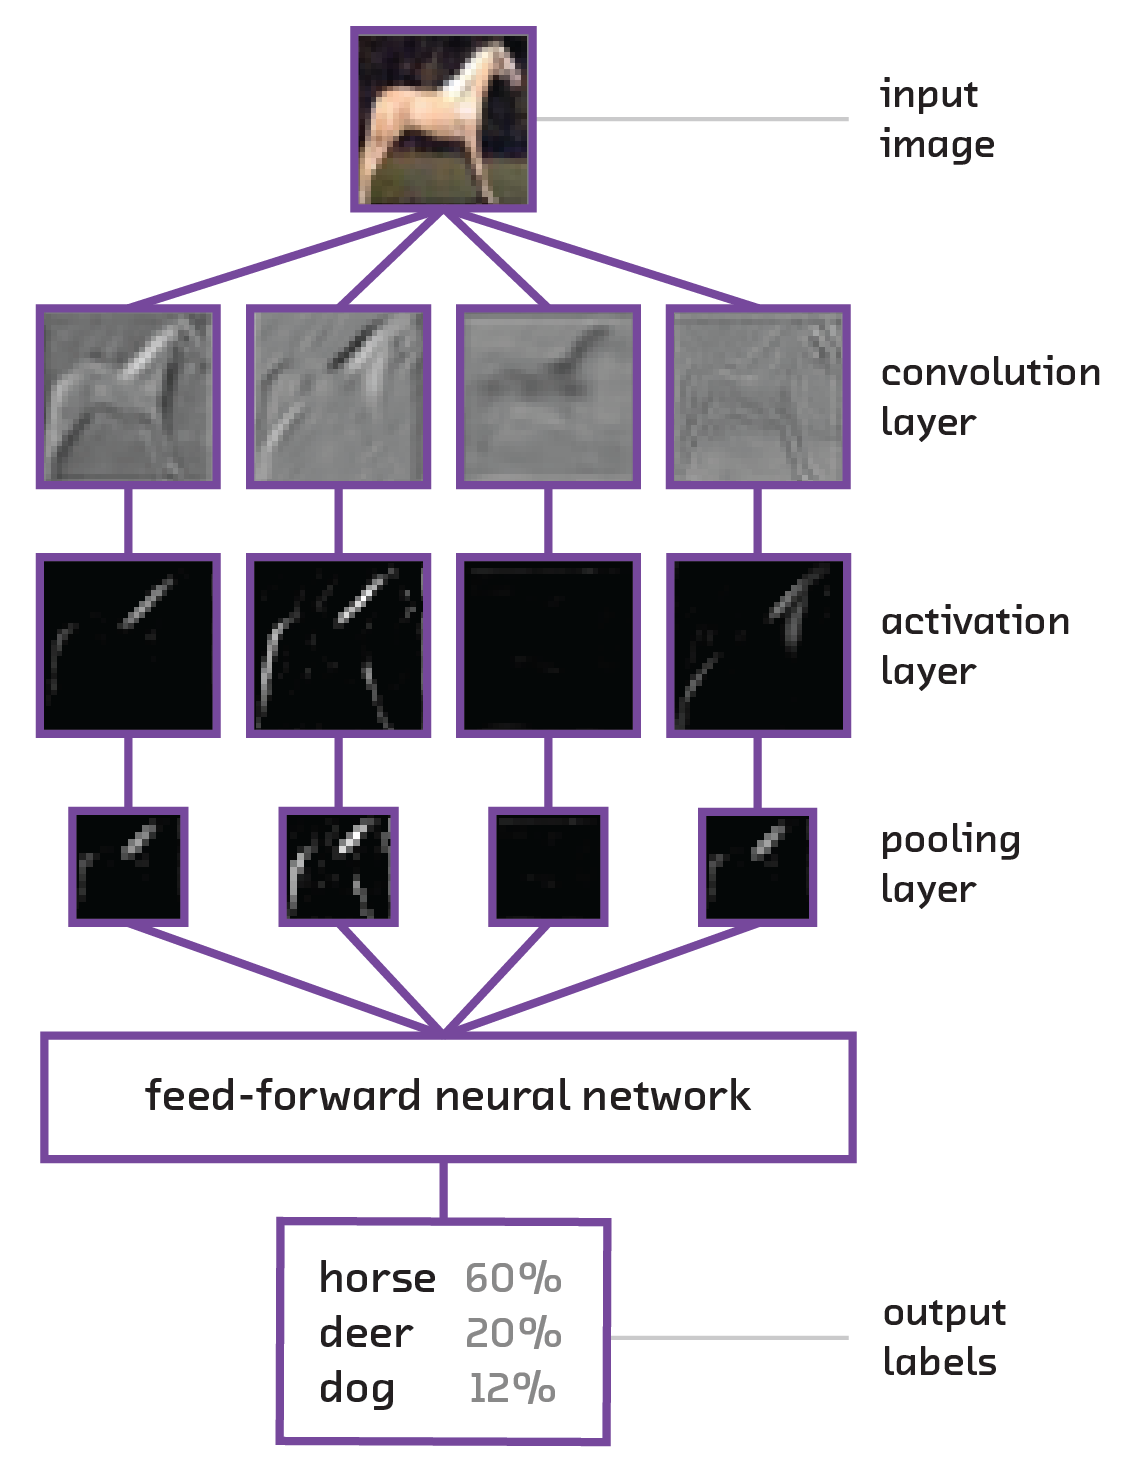 A simple convolutional neural networks processing an input image.